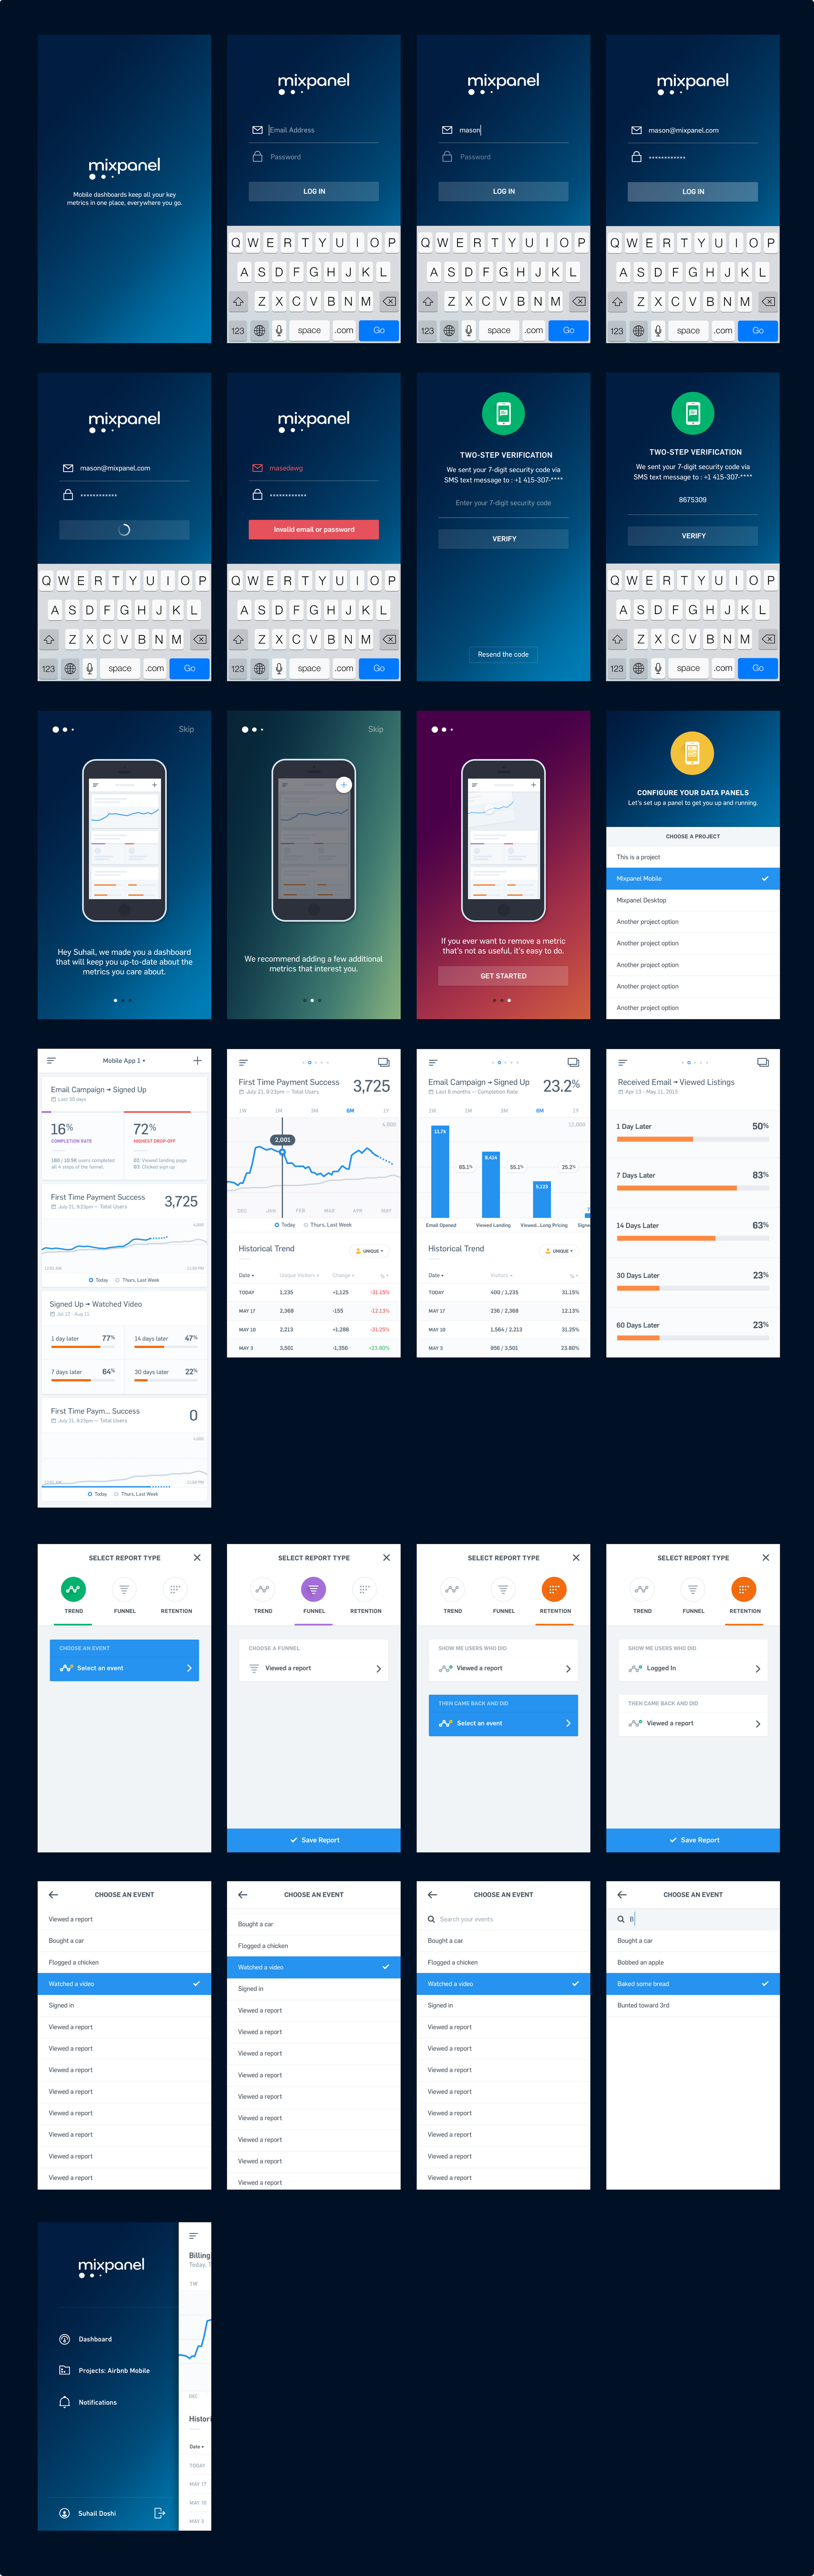 The final visual design for the Mixpanel mobile iOS app. Click image to see more.